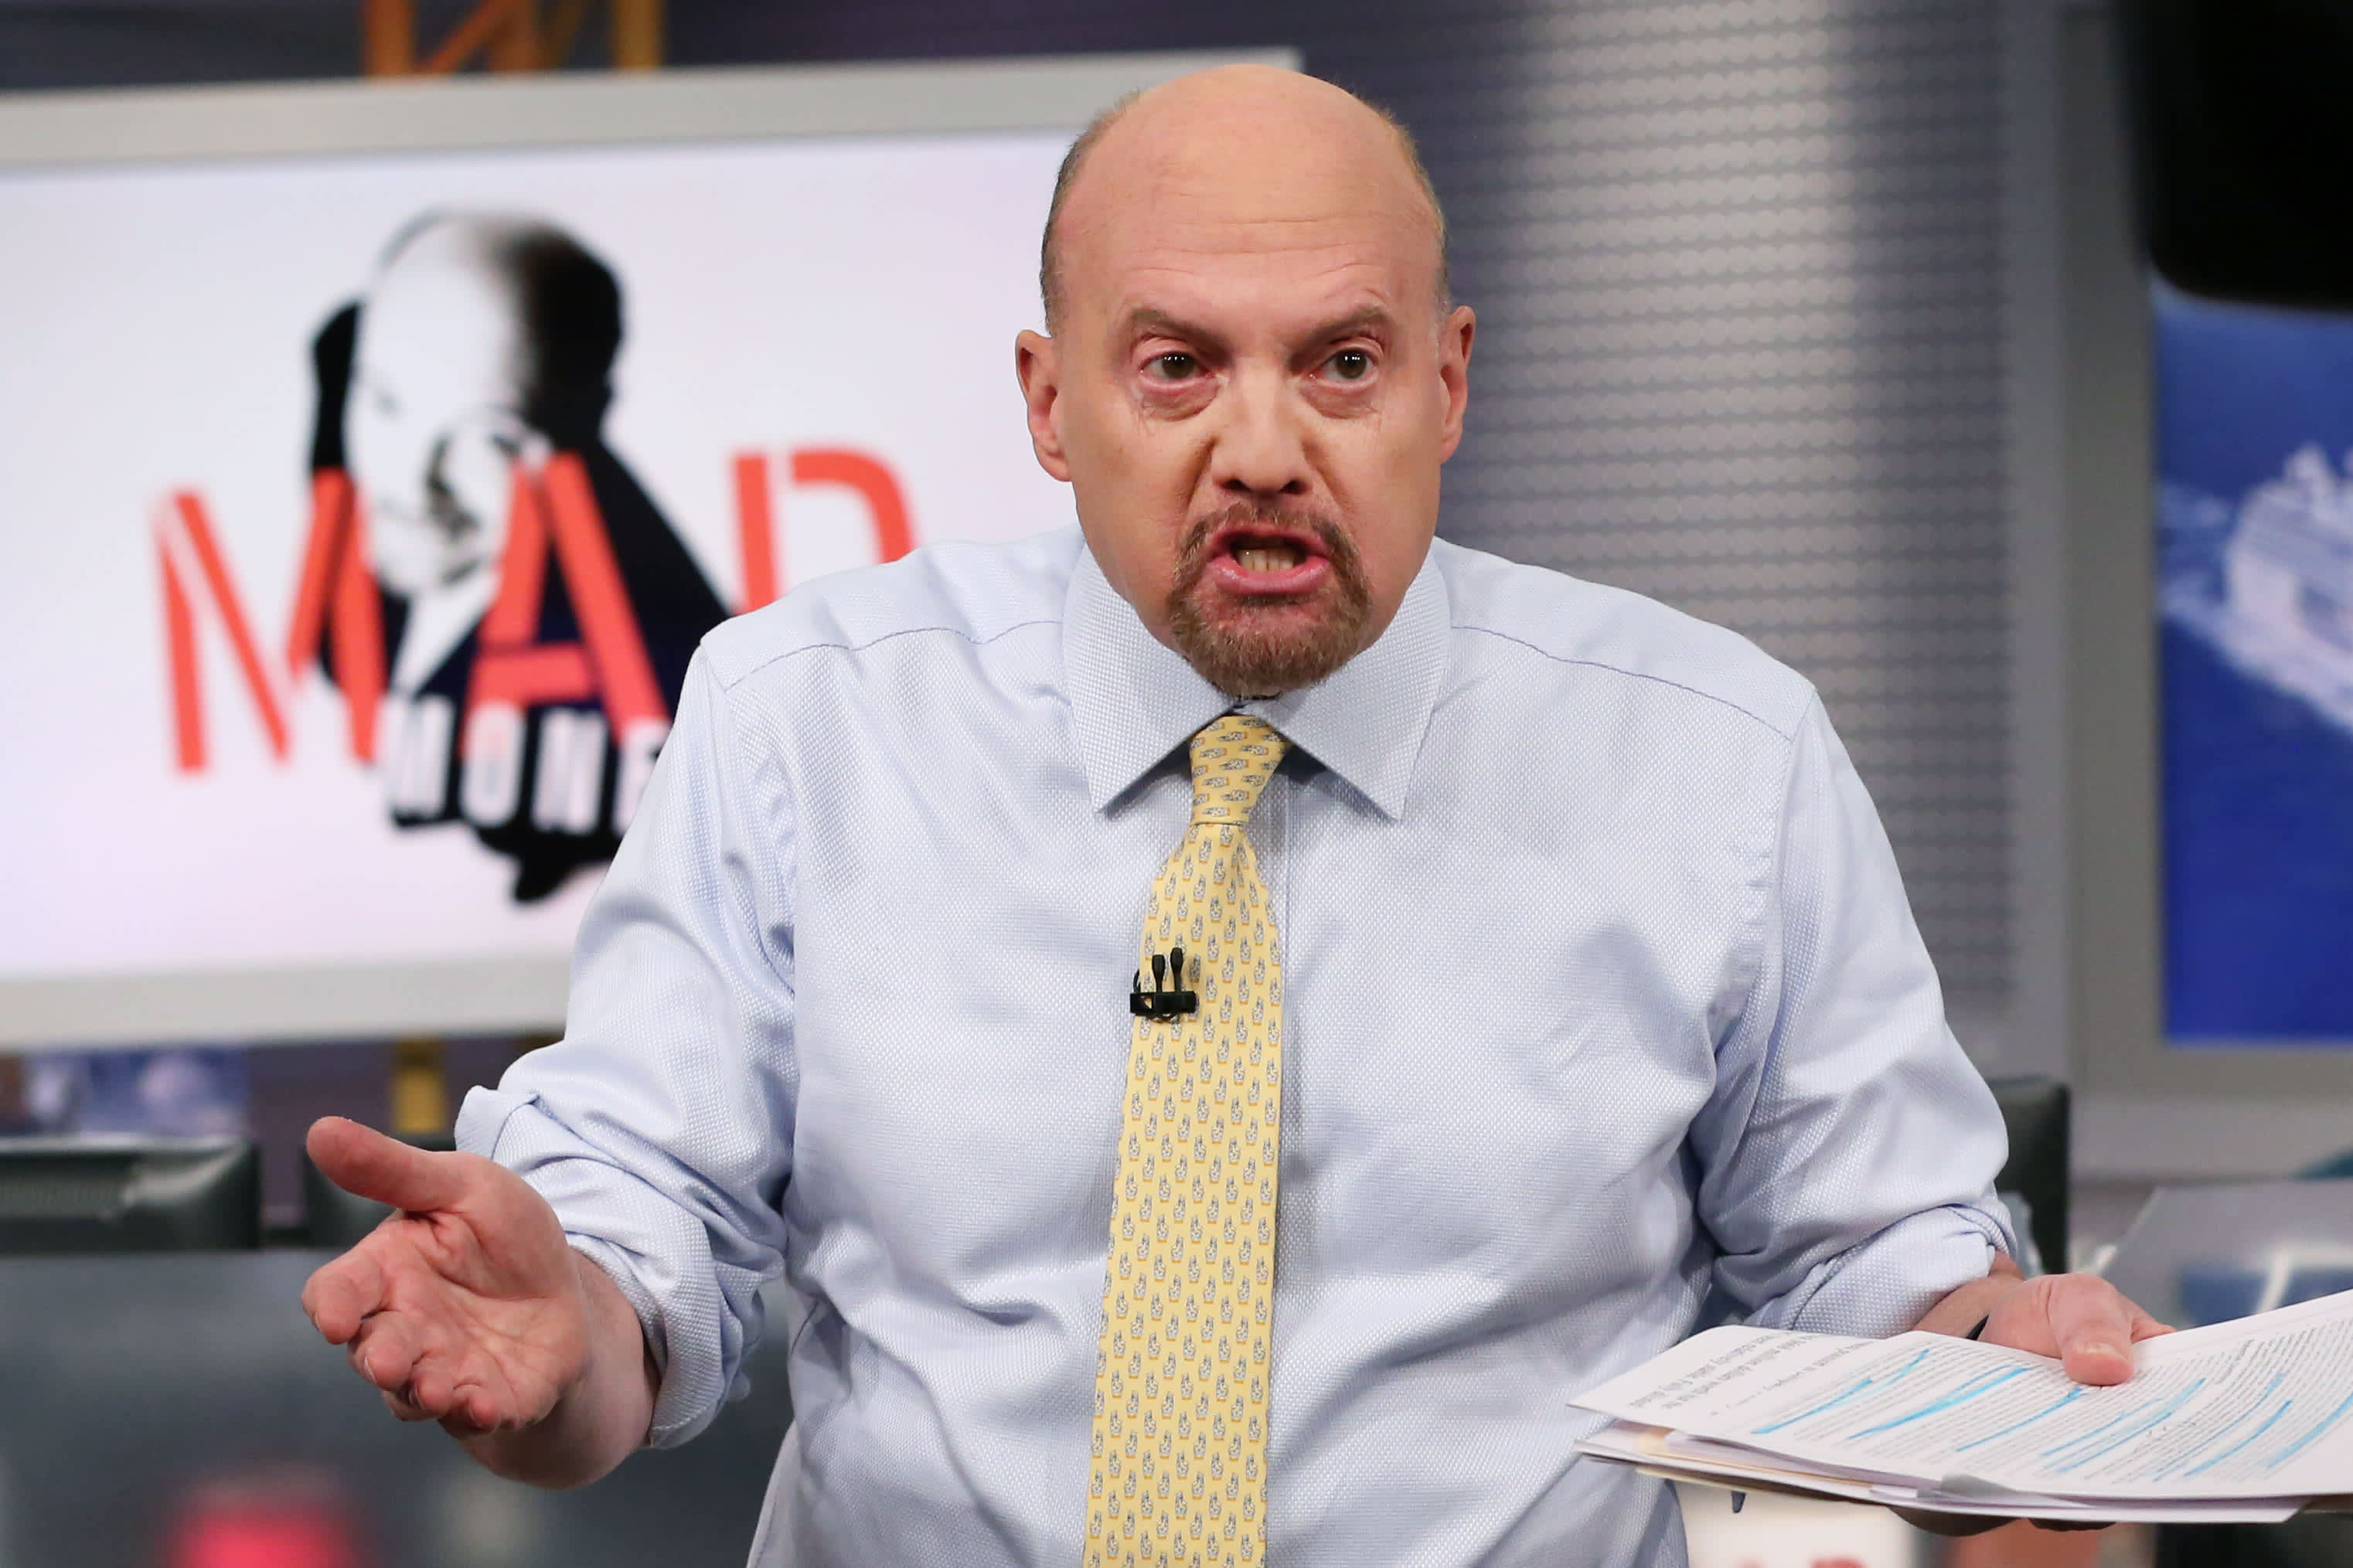 Jim Cramer says the valuation of Big Tech megacaps is well-deserved